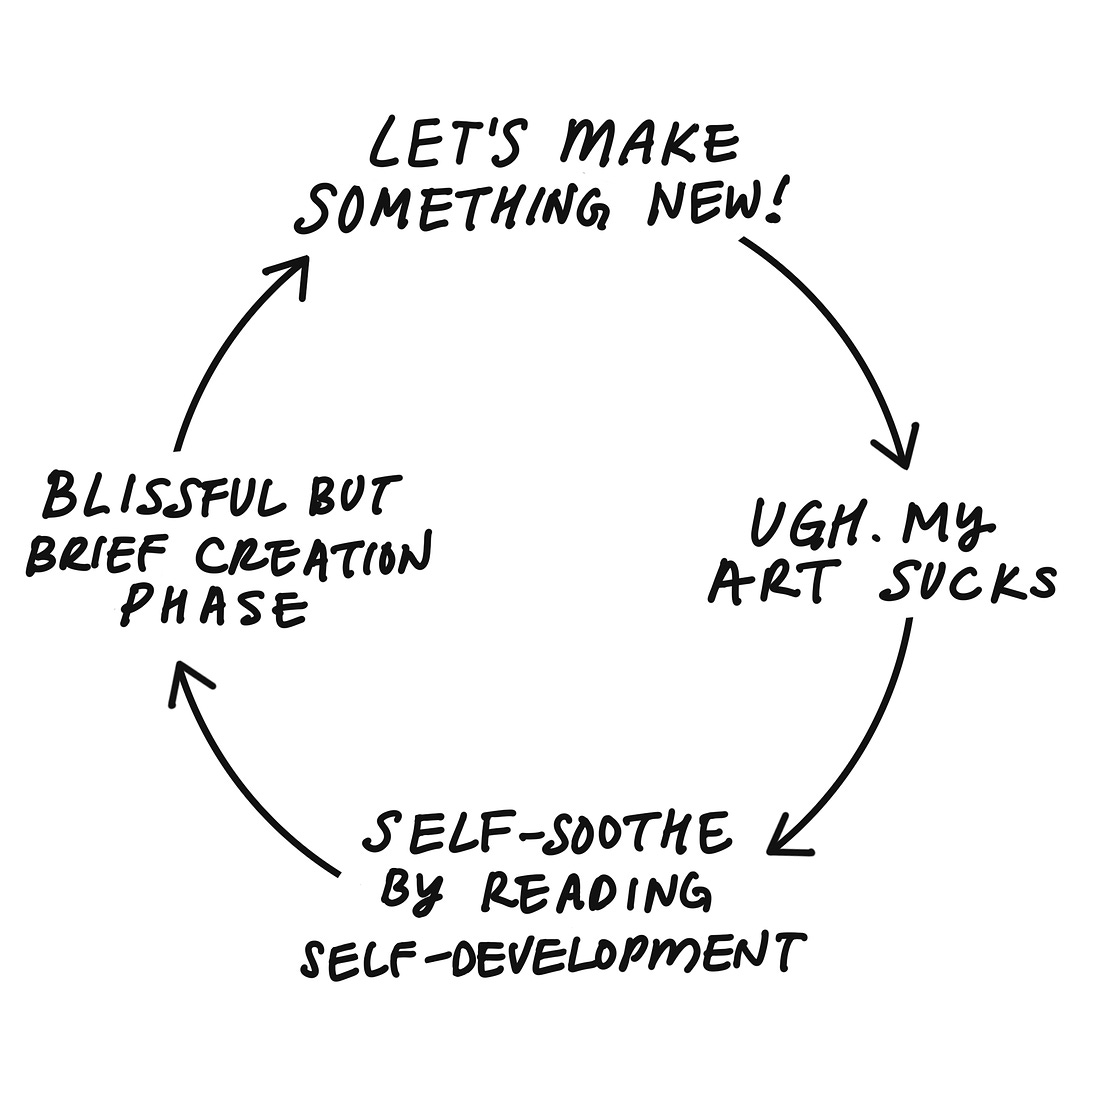 A cycle graphic depicting the creative process: let's make something new -> ugh. my art sucks -> self-soothe by reading self-development -> blissful but brief creation phase